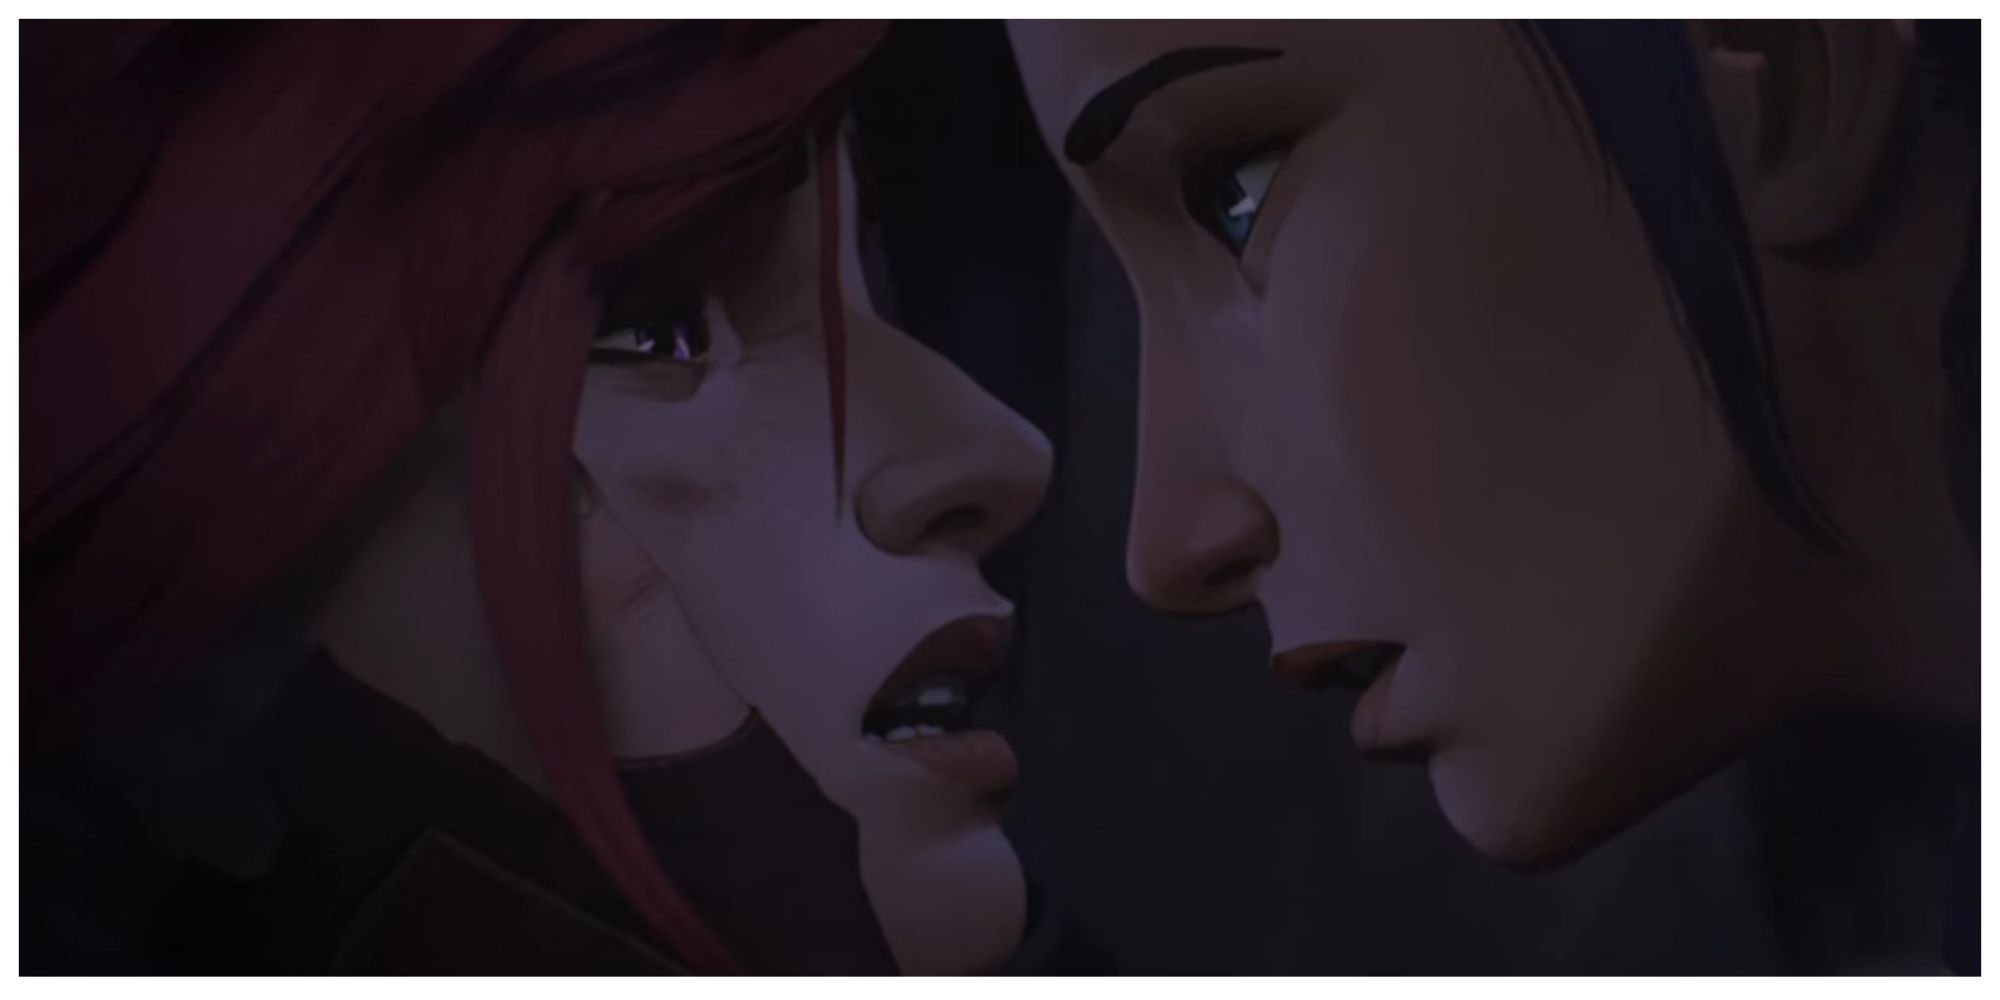 Vi crying while Caitlyn comfortingly holds her cheek with one of her hands their faces close enough to potentially kiss